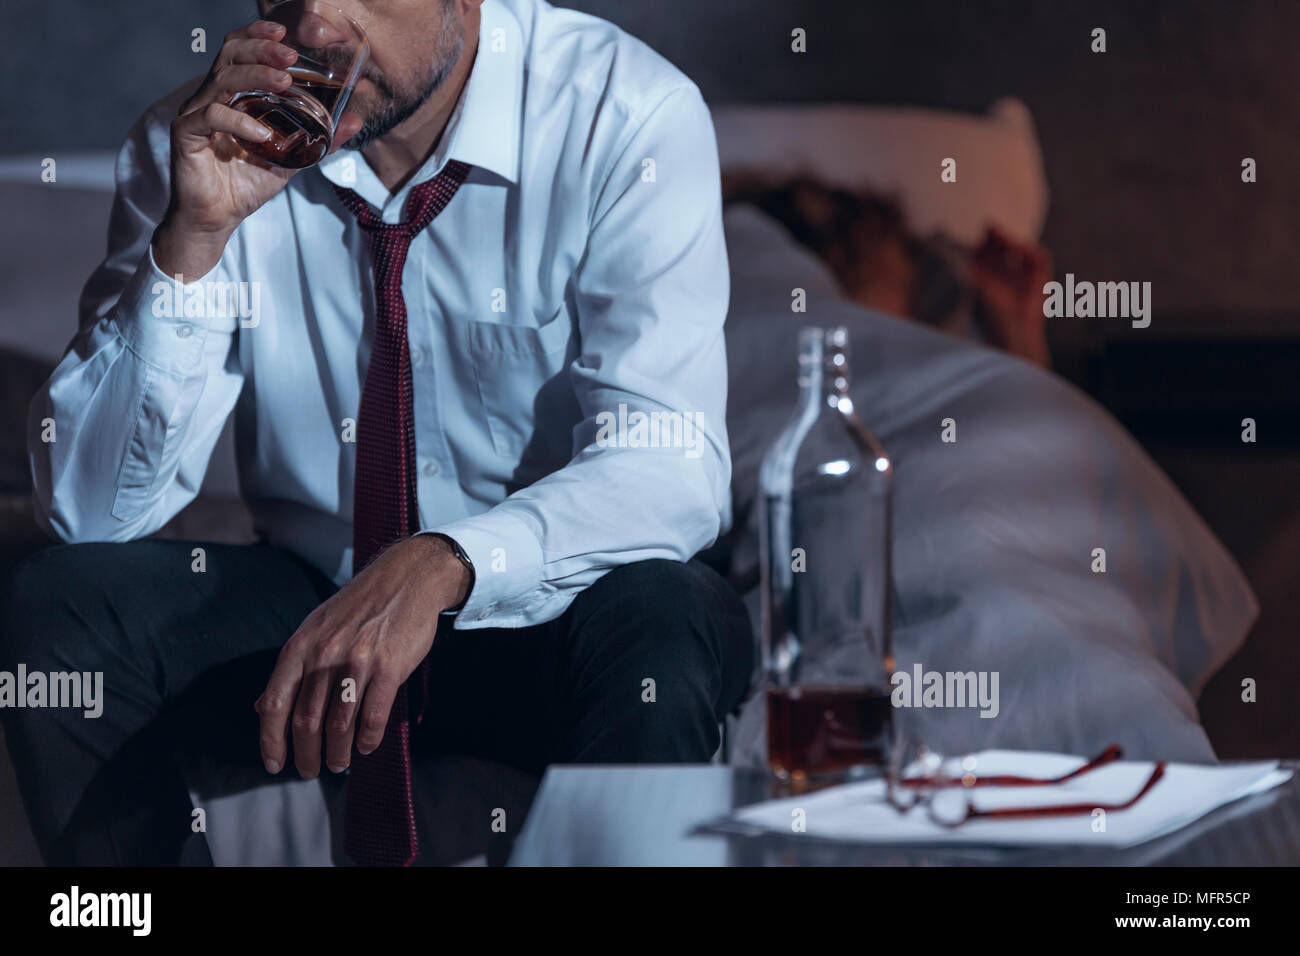 Man drinking whiskey in a suit while his woman is asleep Stock Photo